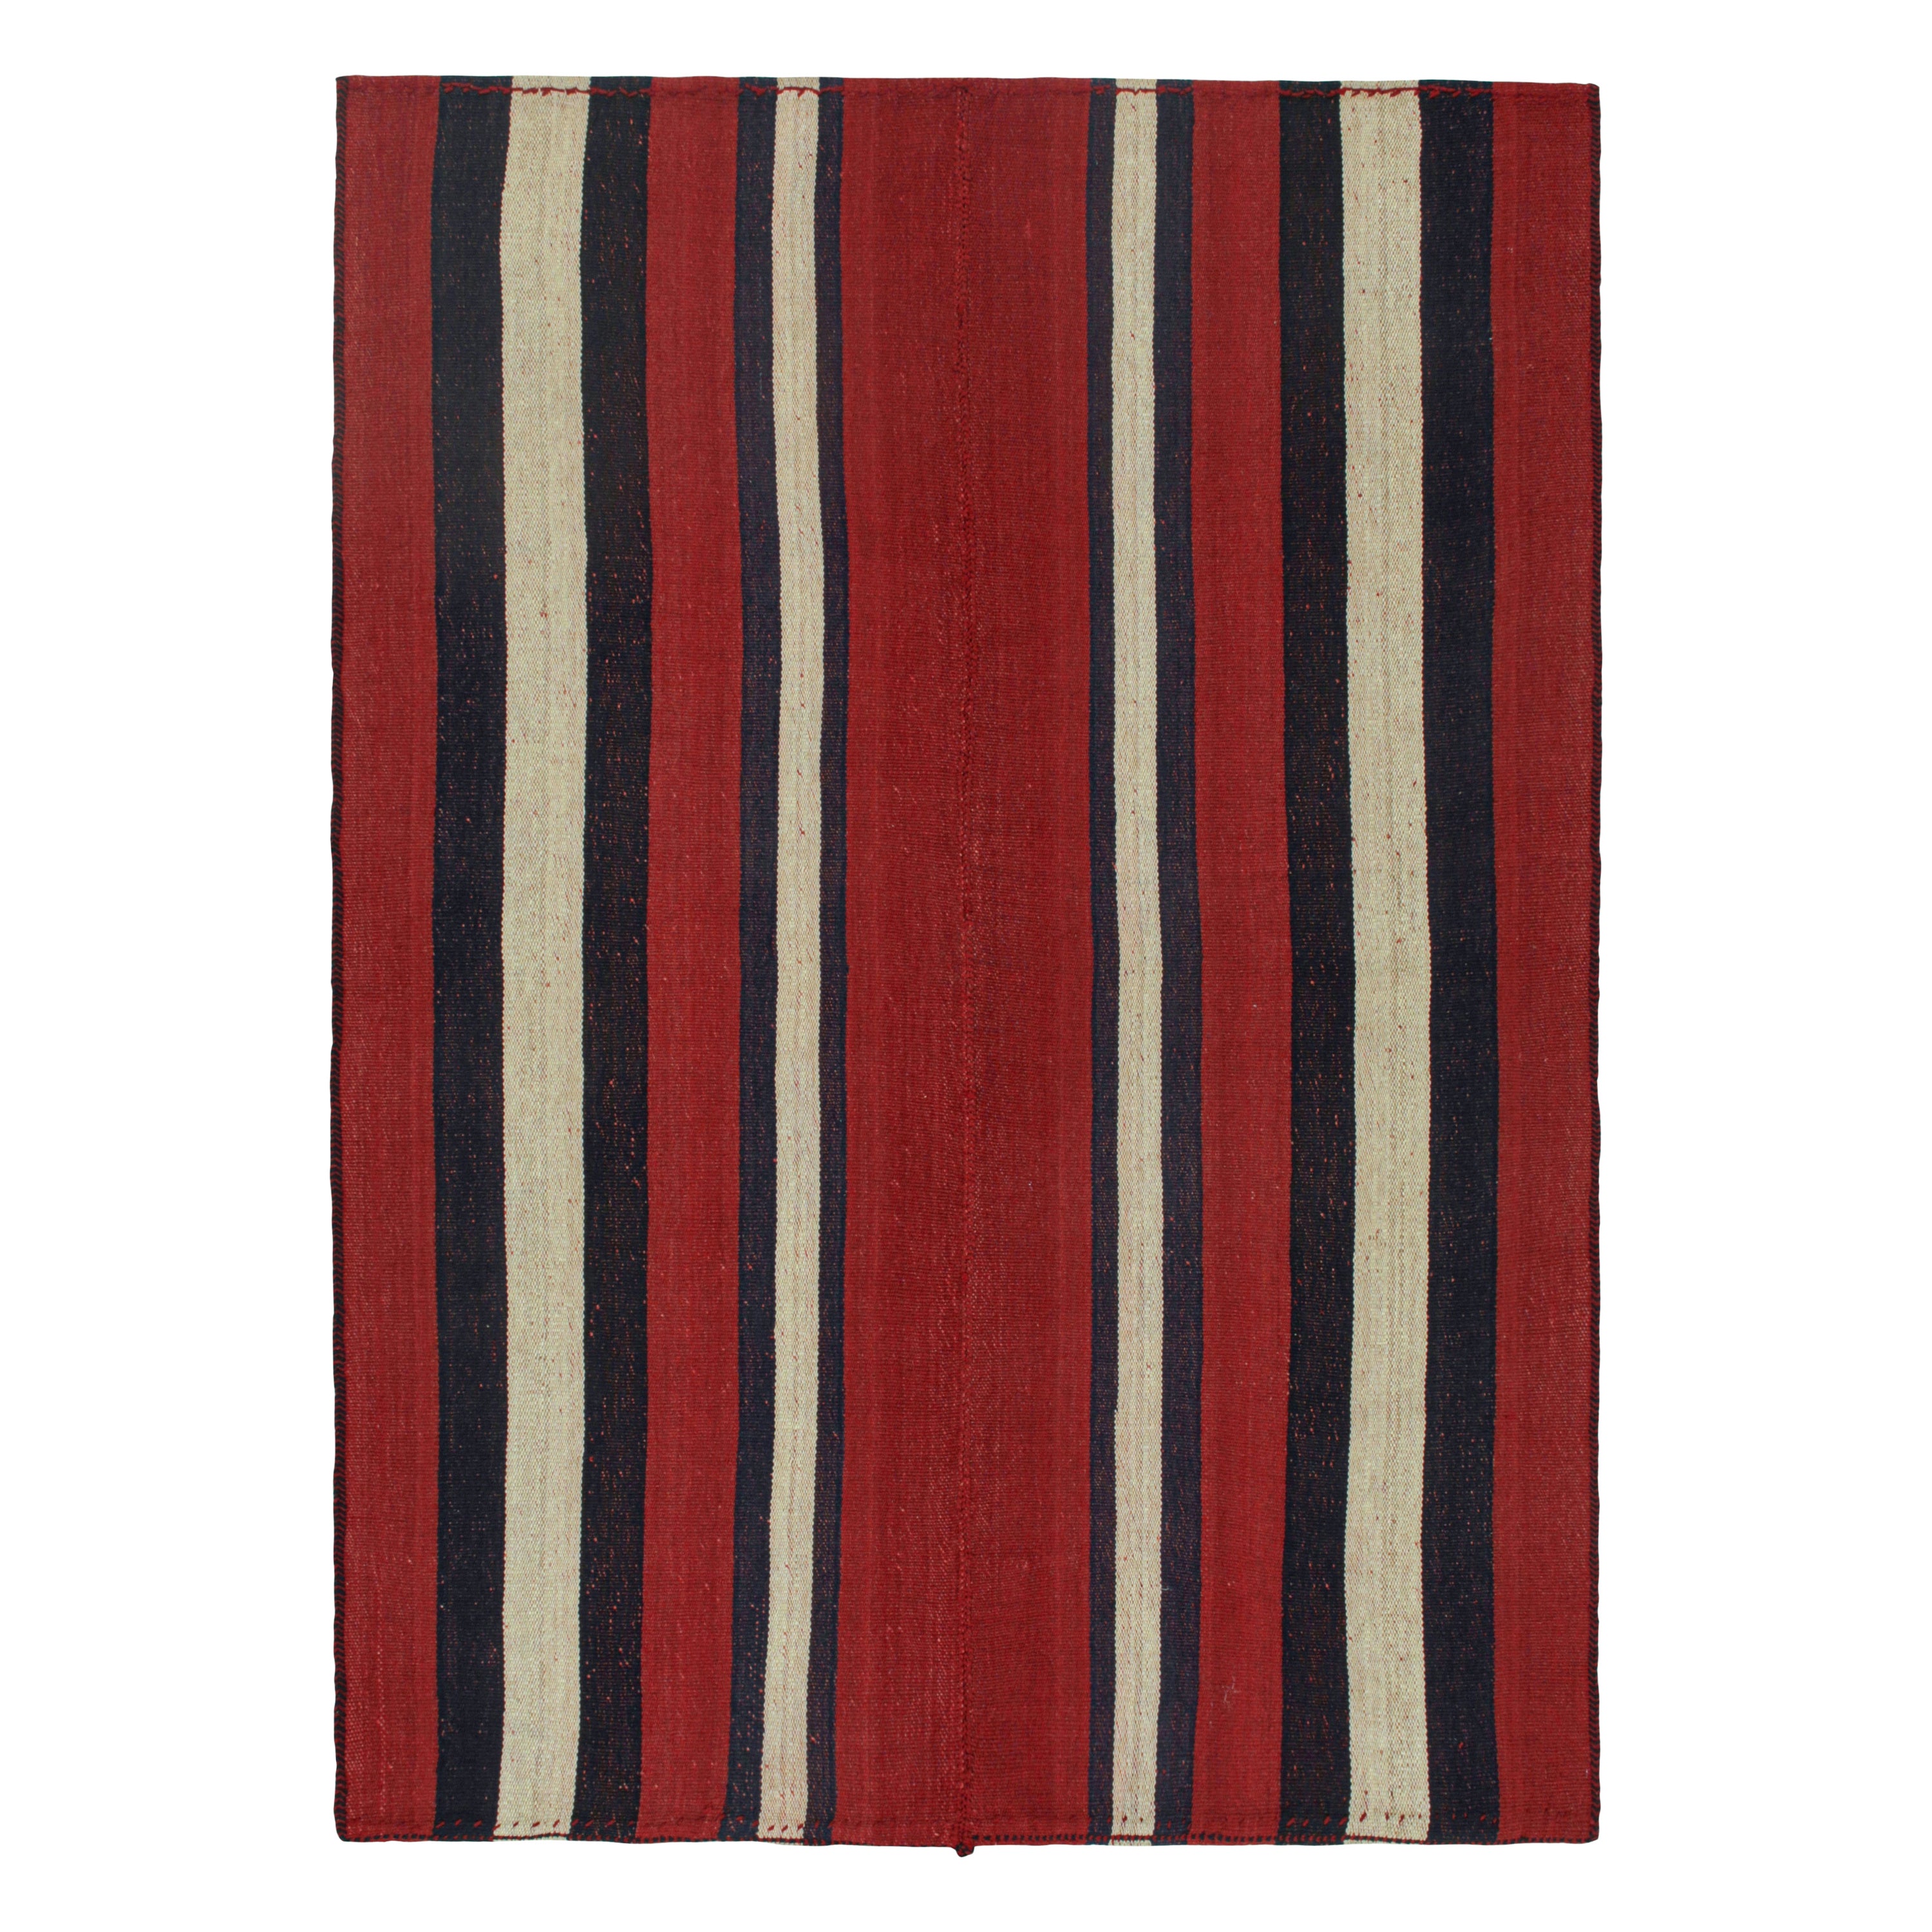 Vintage Persian Kilim with Red, Blue, and Off-White Stripes